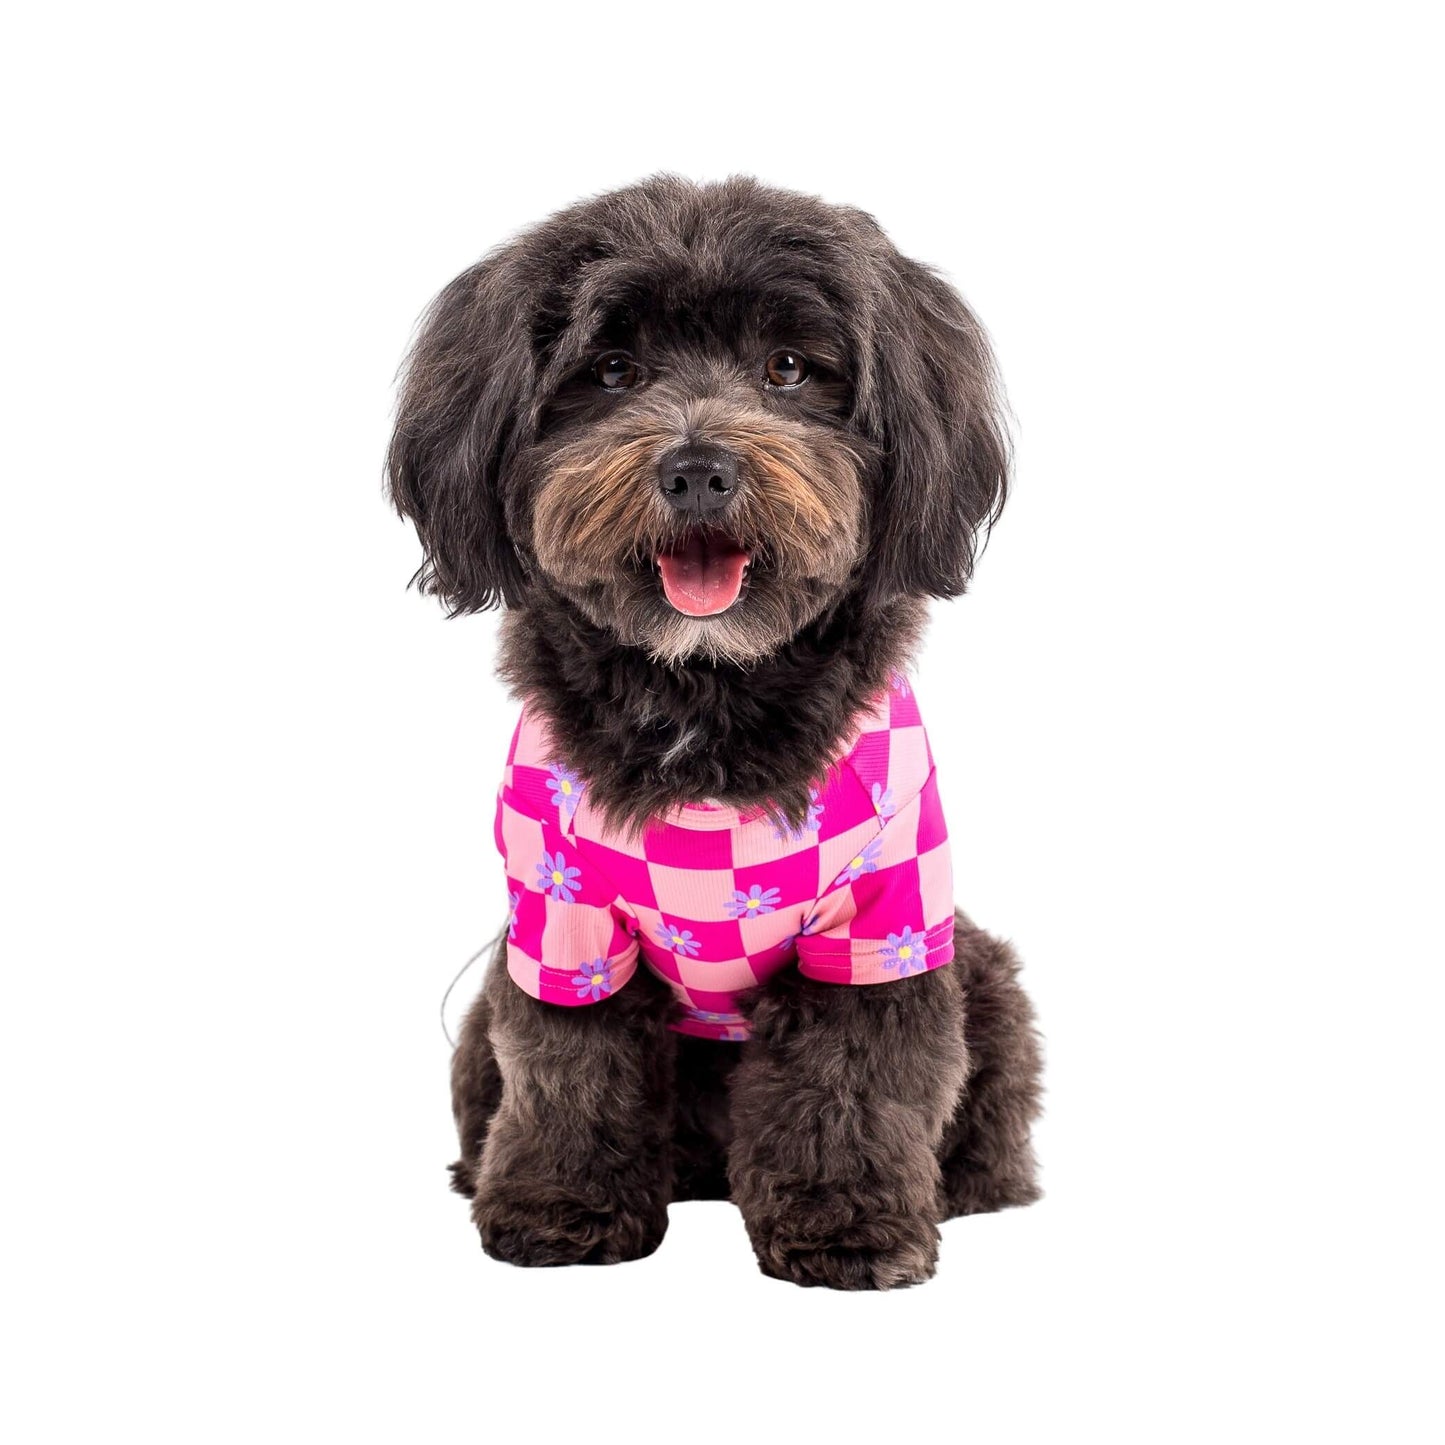 Havanese dog wearing Vibrant Hounds Crazy Daisy cooling shirt for dogs. It is pink chequered with daisys printed on it.